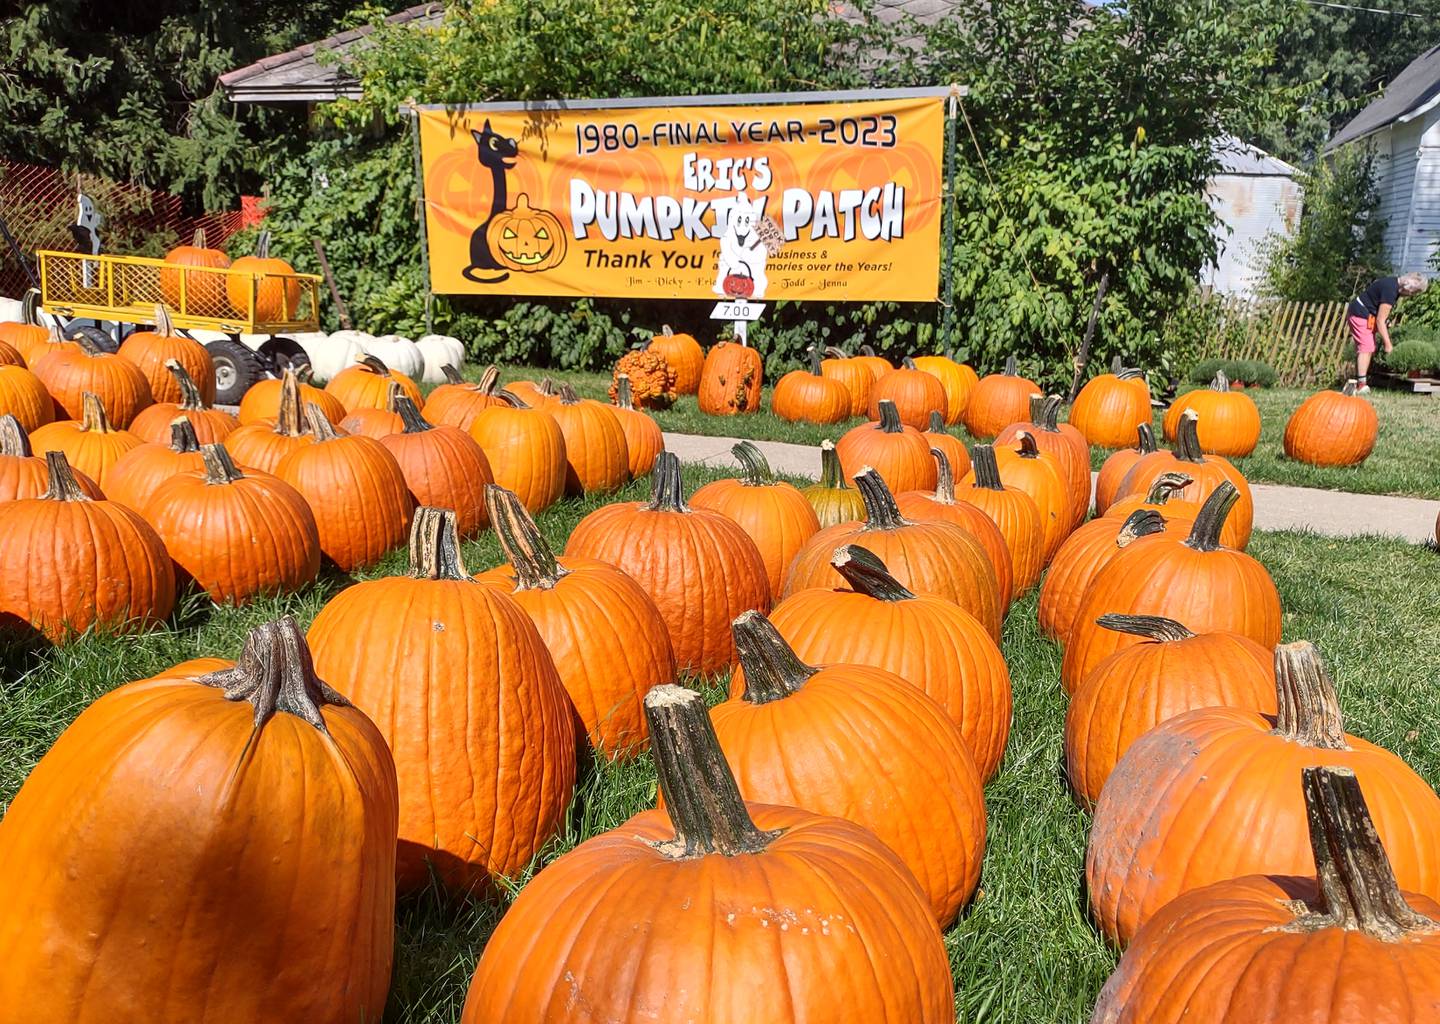 Eric's Pumpkin Patch in rural Streator will conclude its final season of pumpkin sales this year. Pumpkins line the yard on Sunday, Sept. 24, 2023.